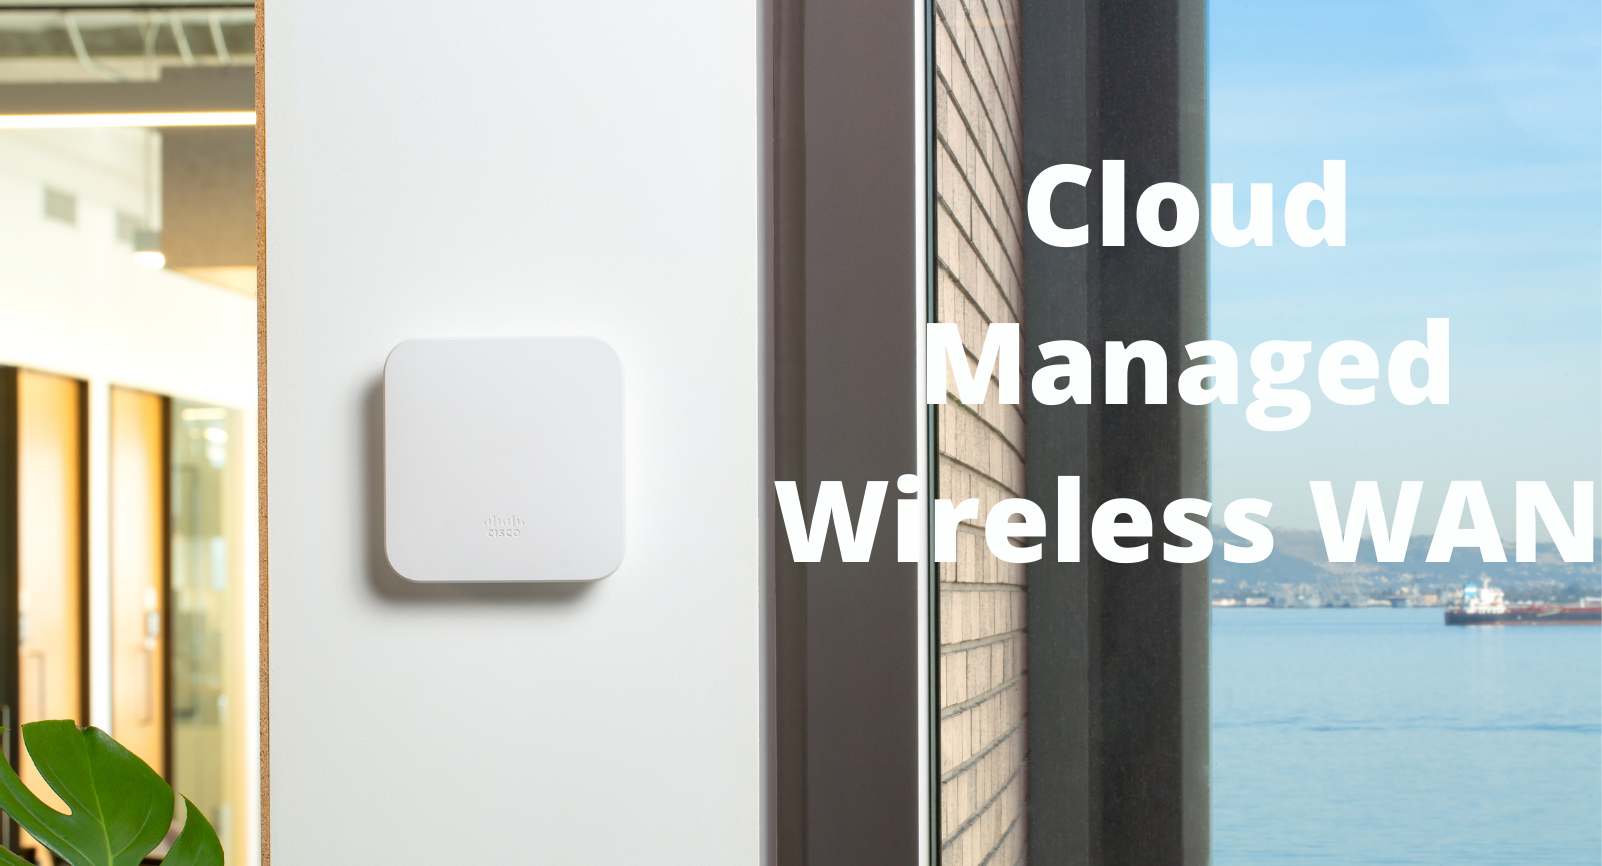 cloud-managed-wireless-wan1.png